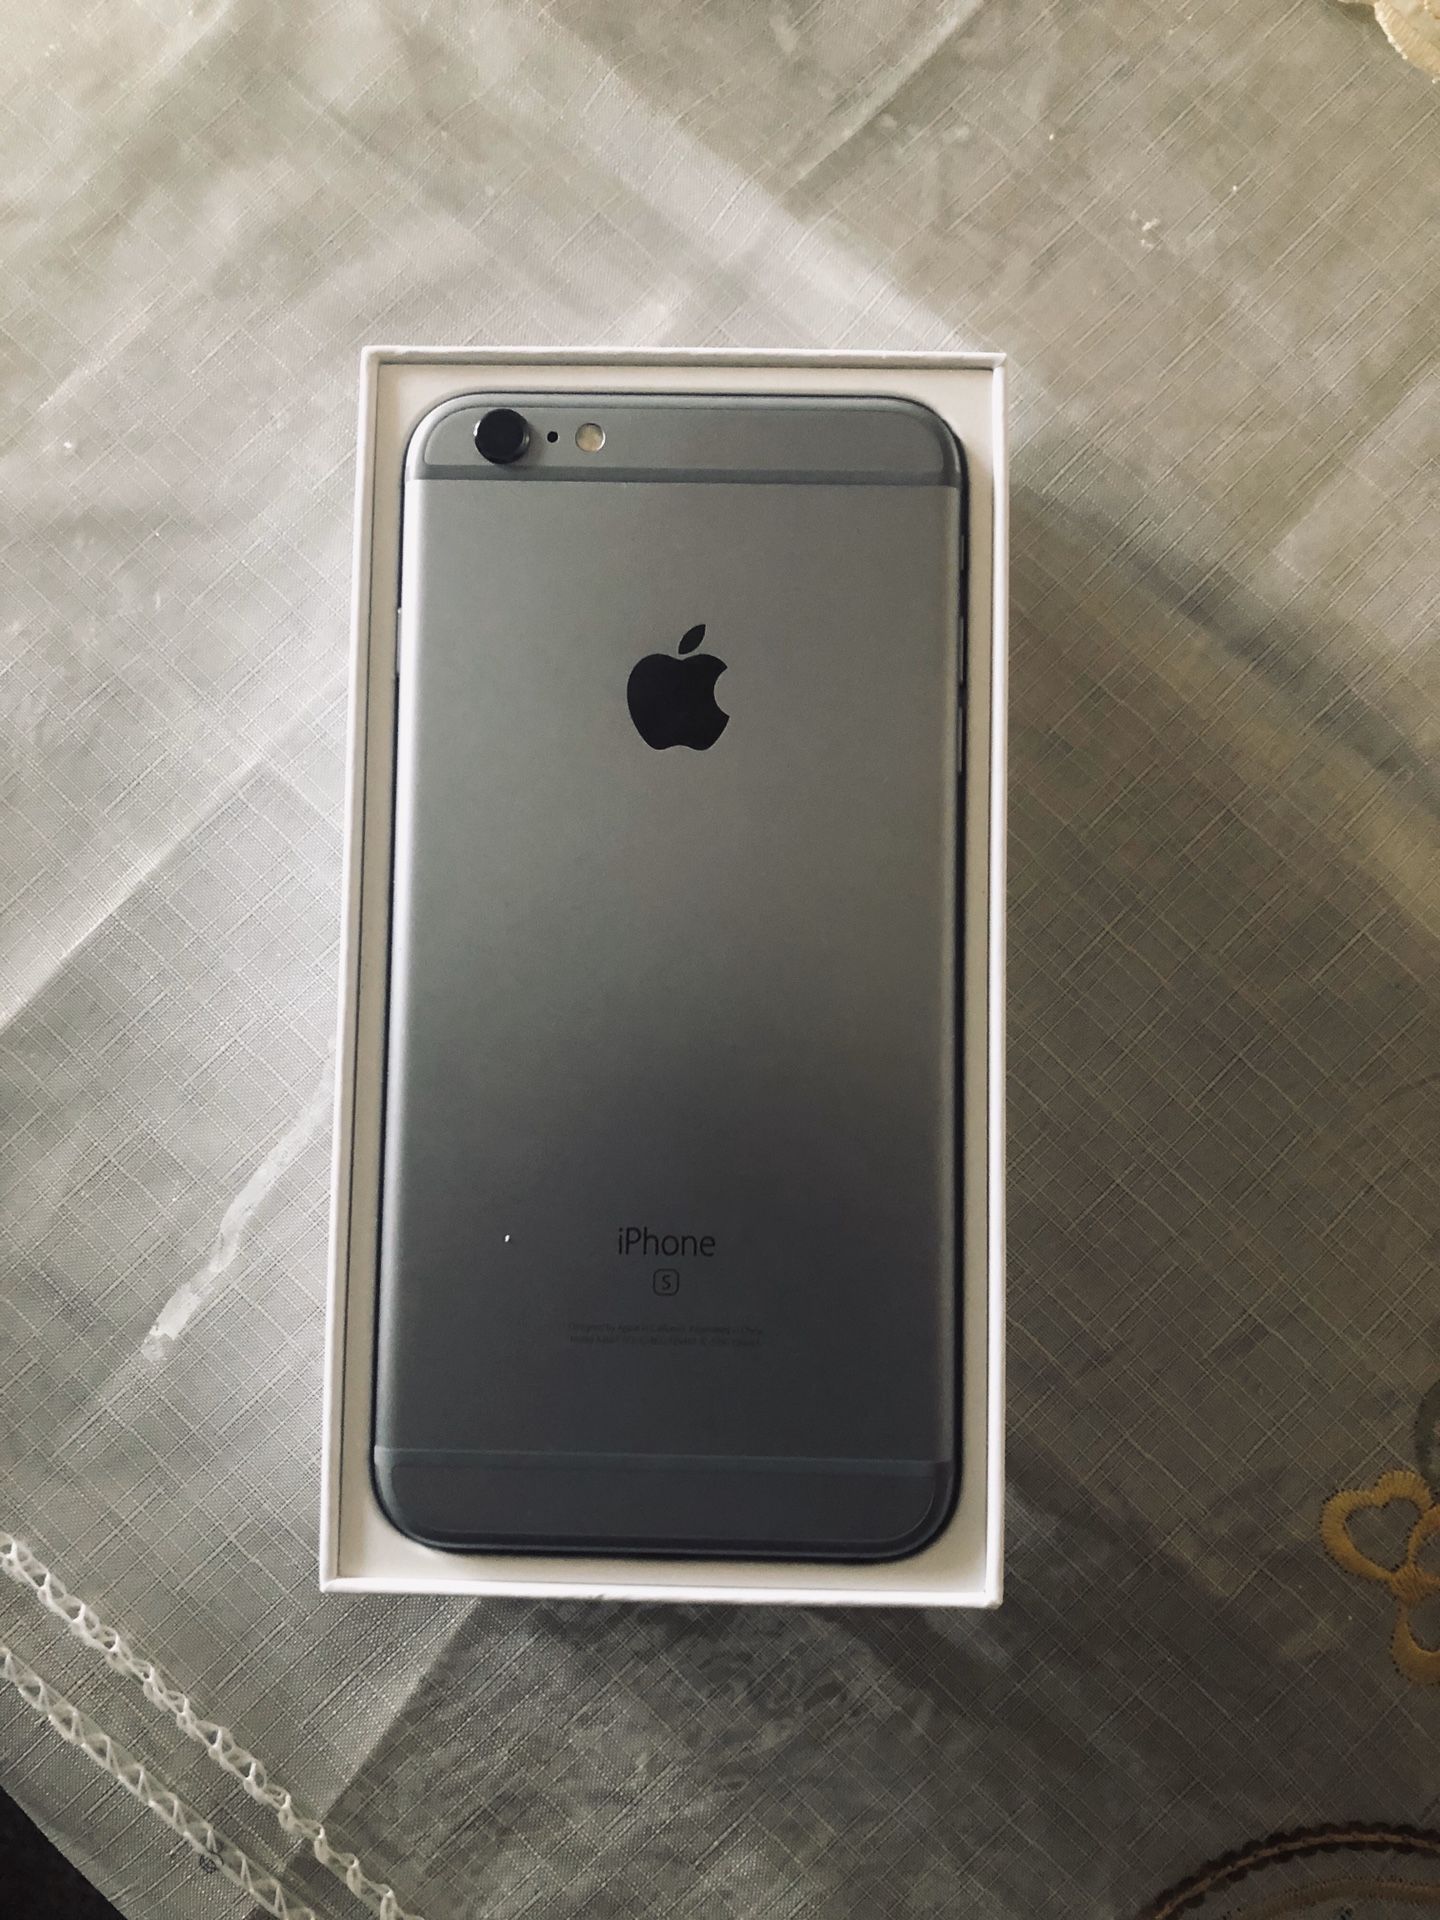 iPhone 6s Plus boost mobile 32g